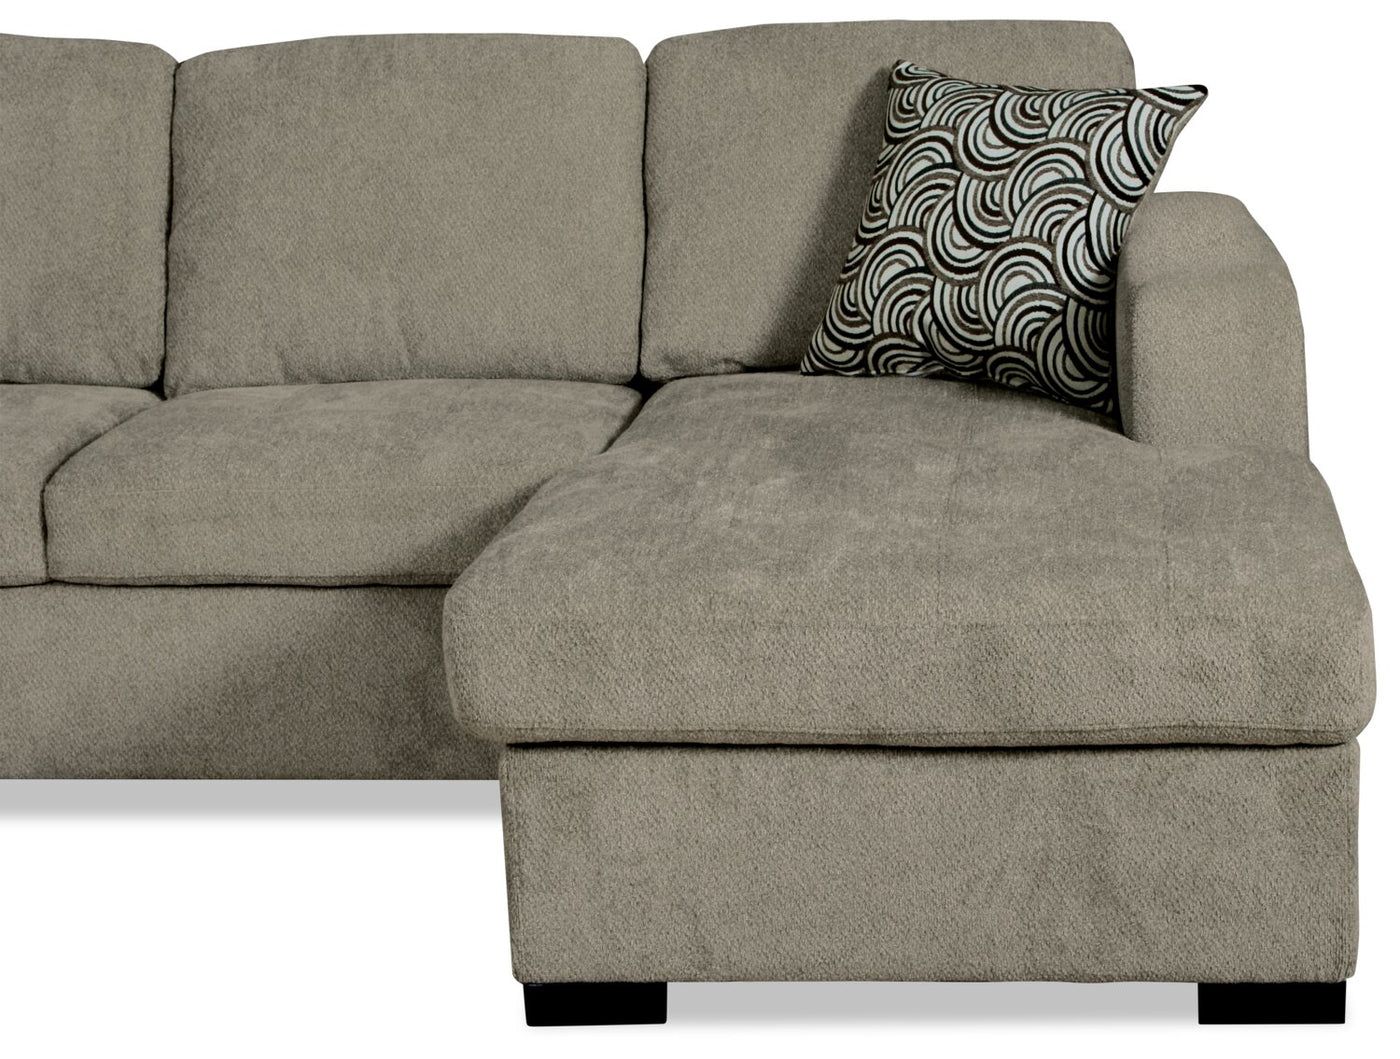 Izzy 4 Piece Chenille Sleeper Sectional With Right Facing Storage C In Chenille Sectional Sofas (Gallery 4 of 20)